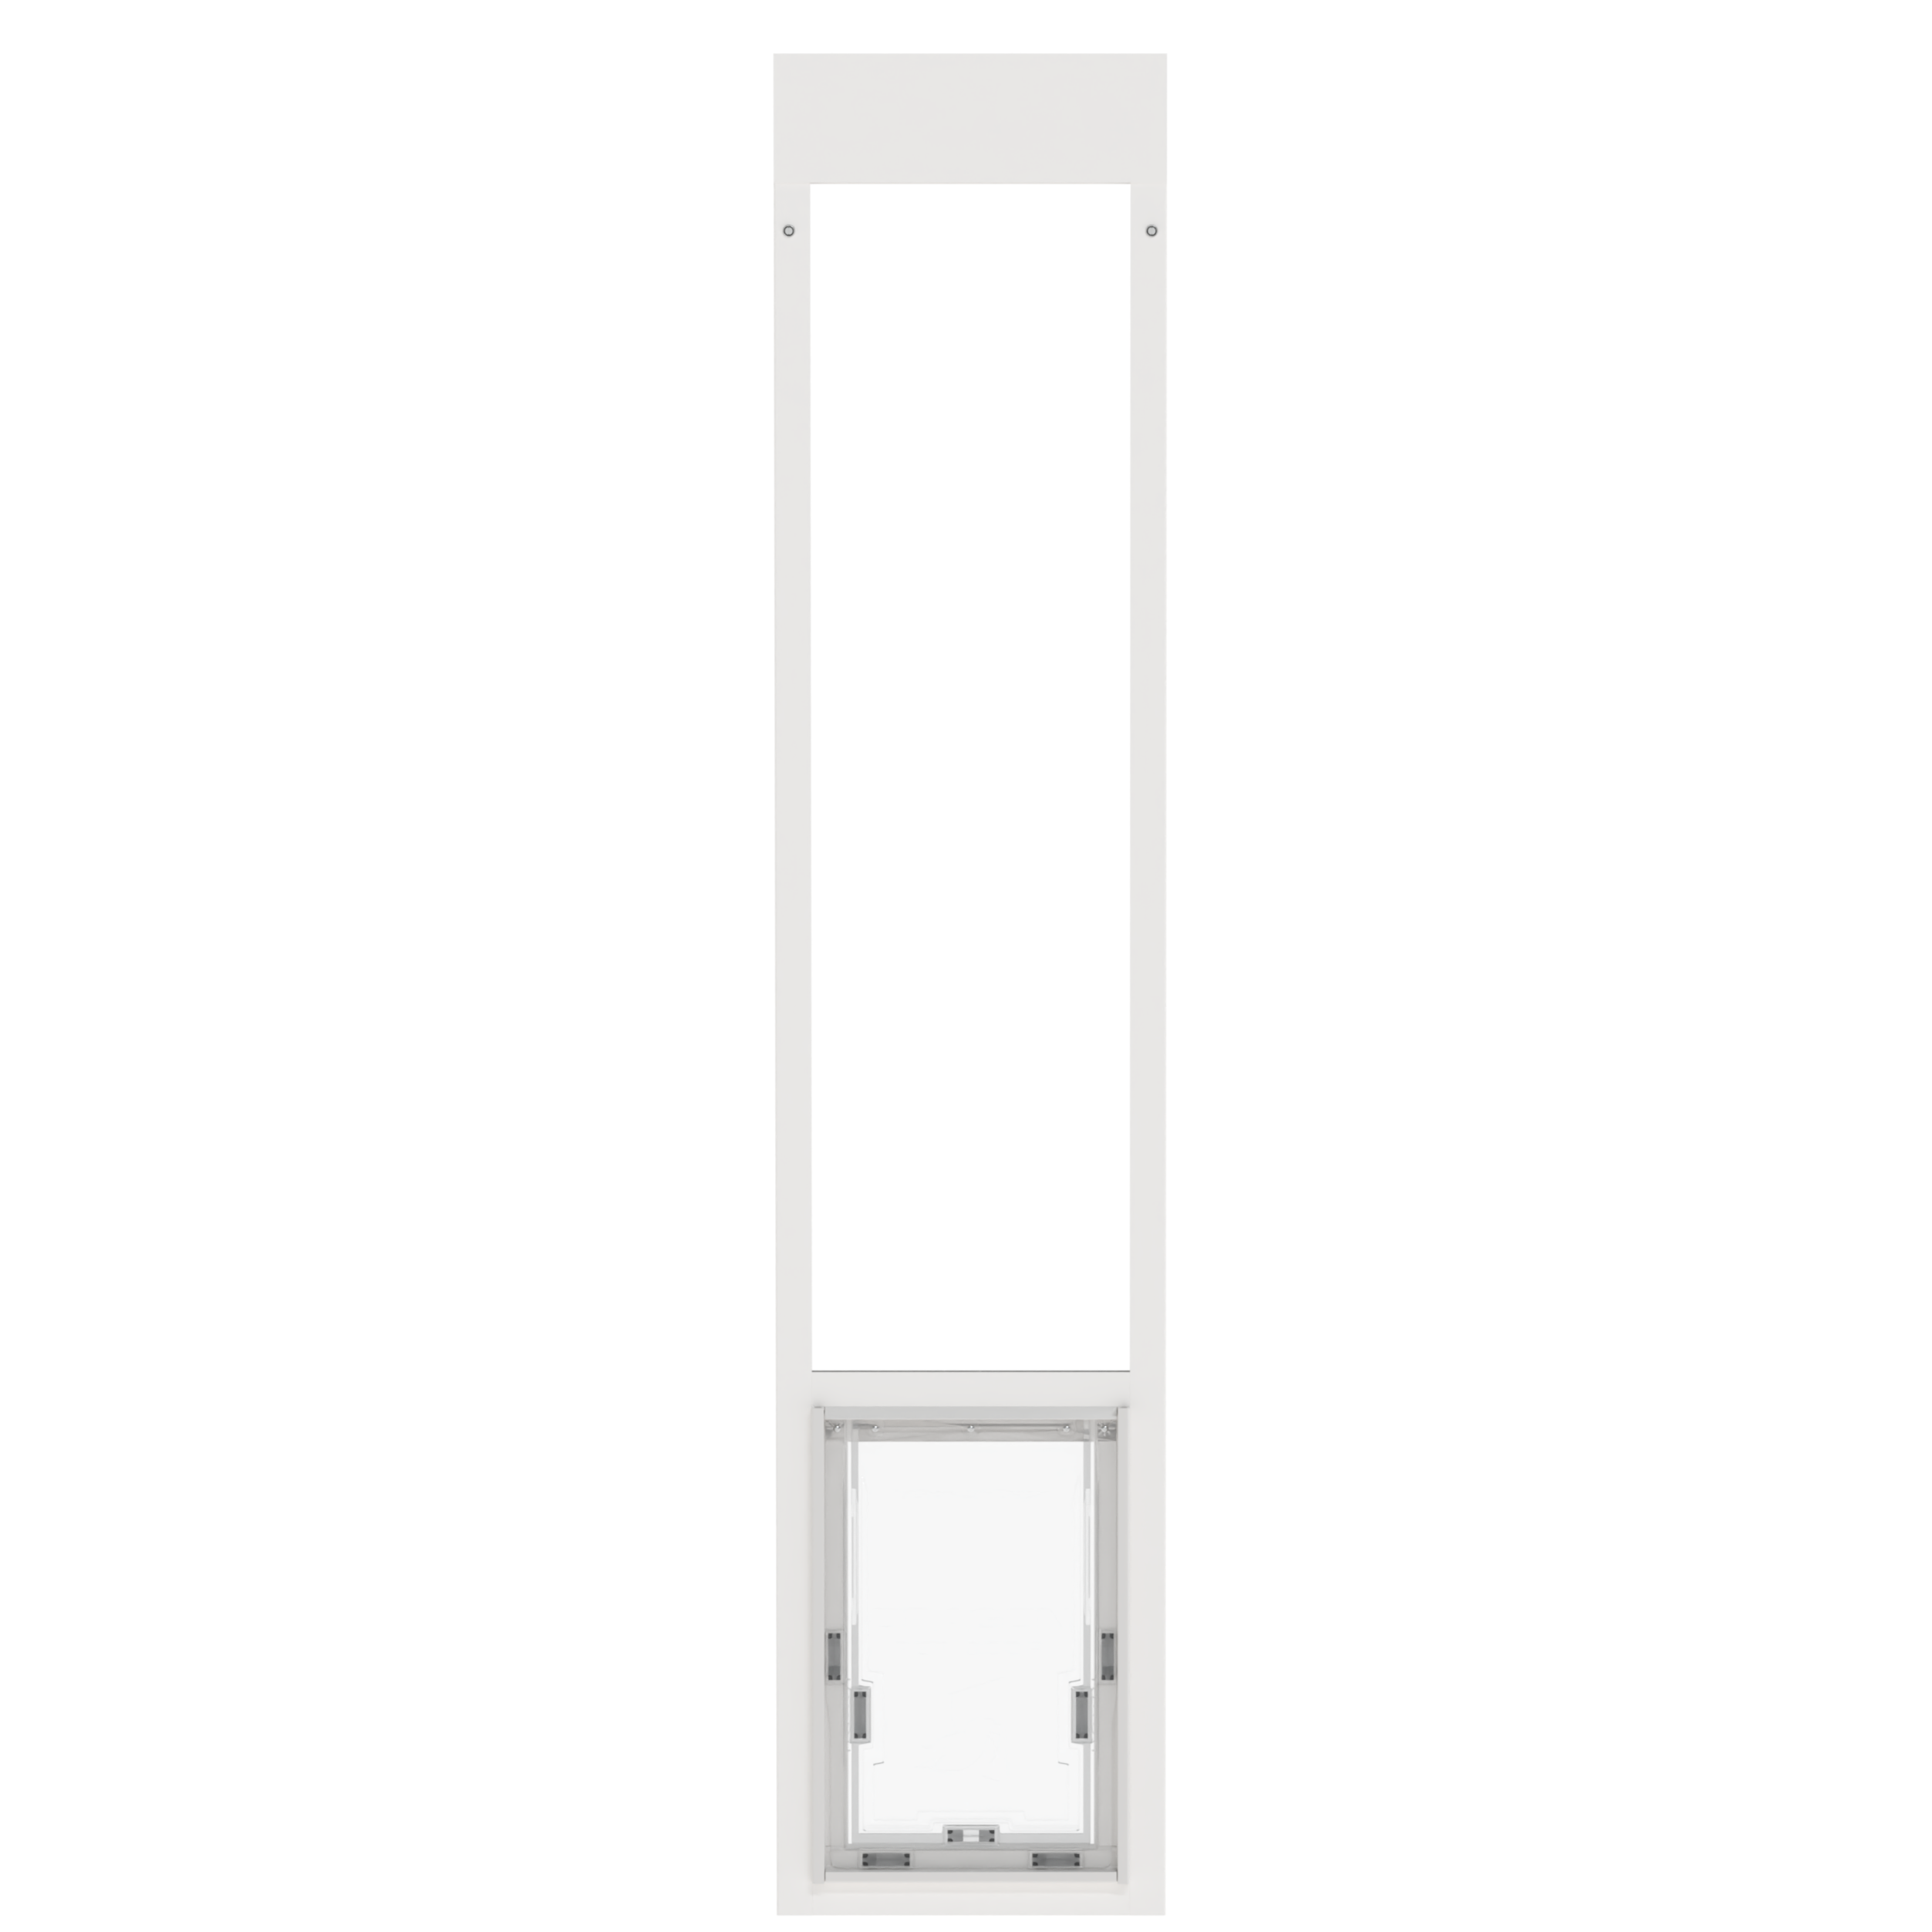 White Dragon single flap pet door for aluminum sliding glass doors, front view, with locking cover. Quick and simple installation with no tools required for most setups.